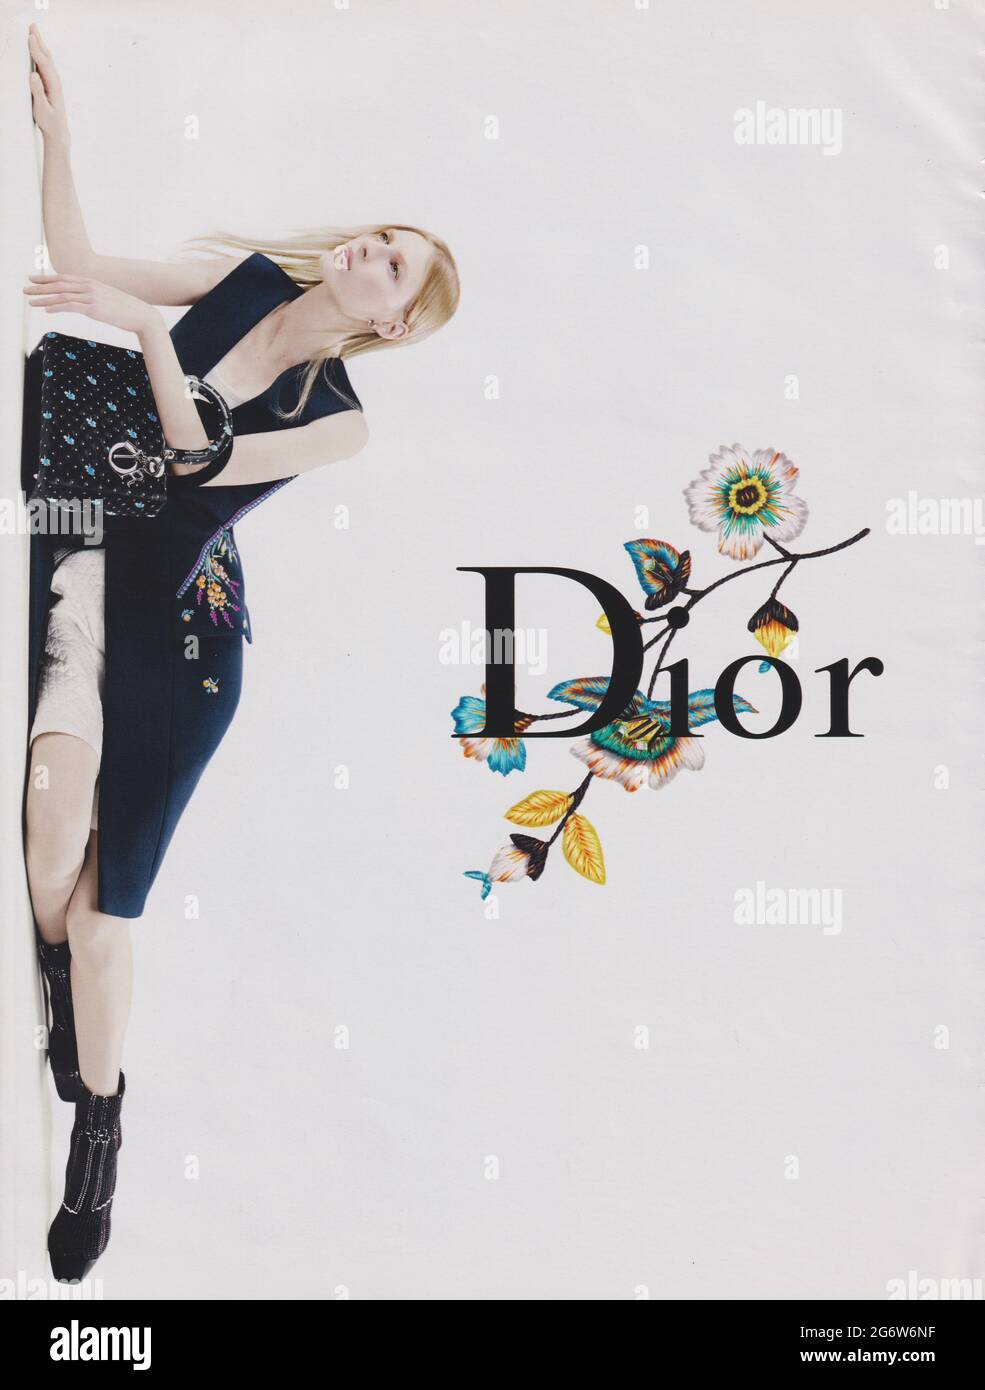 poster advertising Dior fashion house in paper magazine from 2015 year,  advertisement, creative Christian Dior advert from 2010s Stock Photo -  Alamy, poster dior